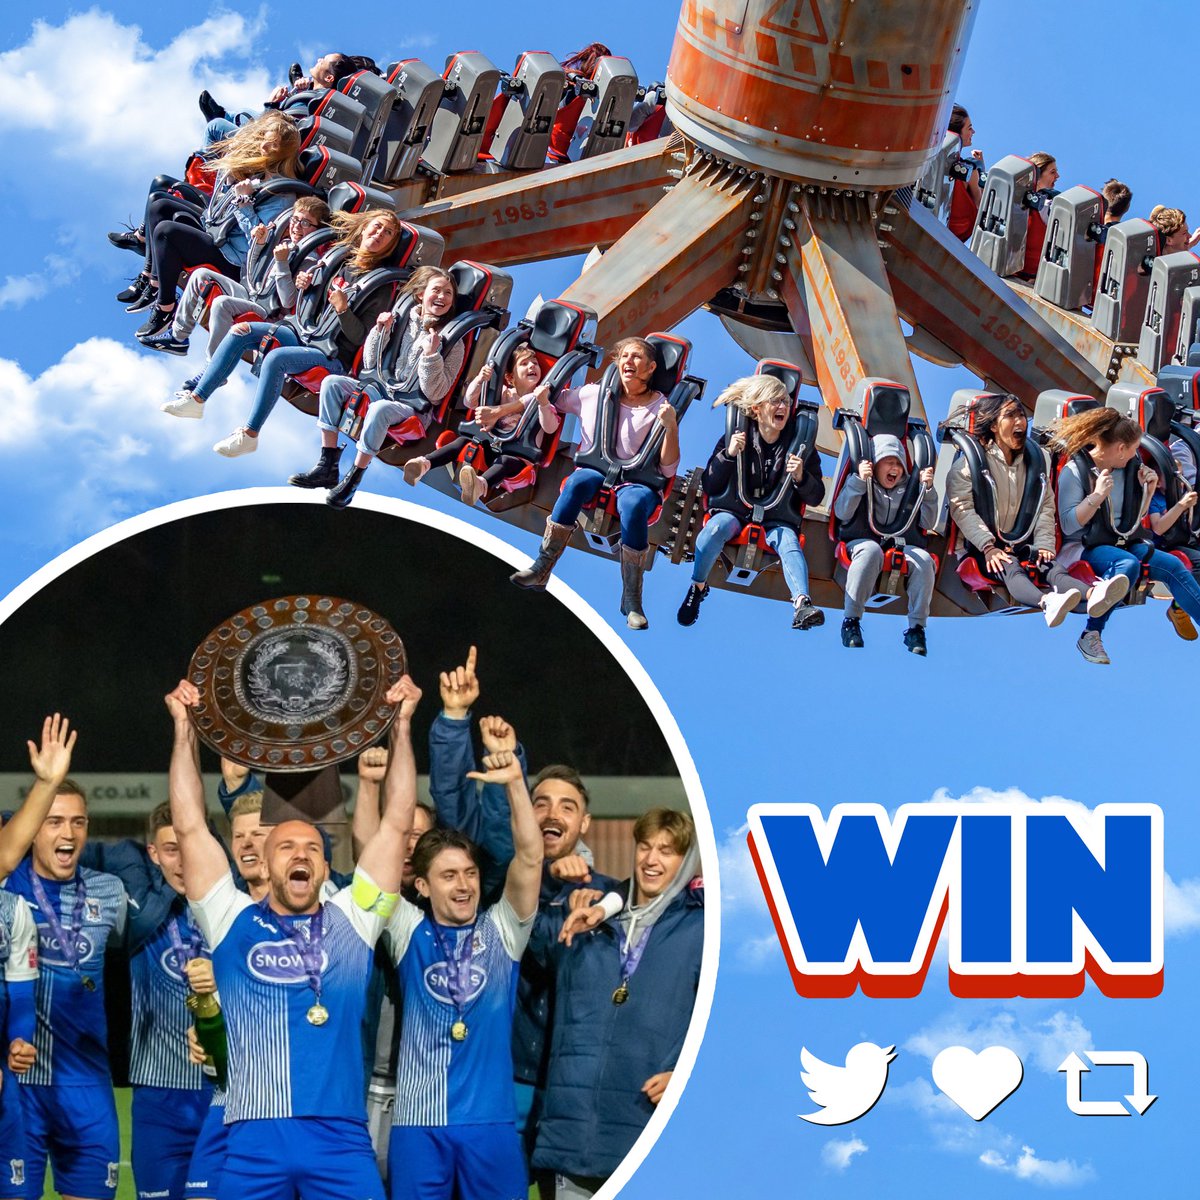 CALLING ALL FOOTBALL FANS! ⚽️ We're giving you the chance to win a Matchday experience at AFC Totton PLUS a Family Ticket to @PaultonsPark Be a Matchday Mascot, meet the players and receive a football signed by all The Stags 🦌 To enter, visit: bit.ly/44IJAB3